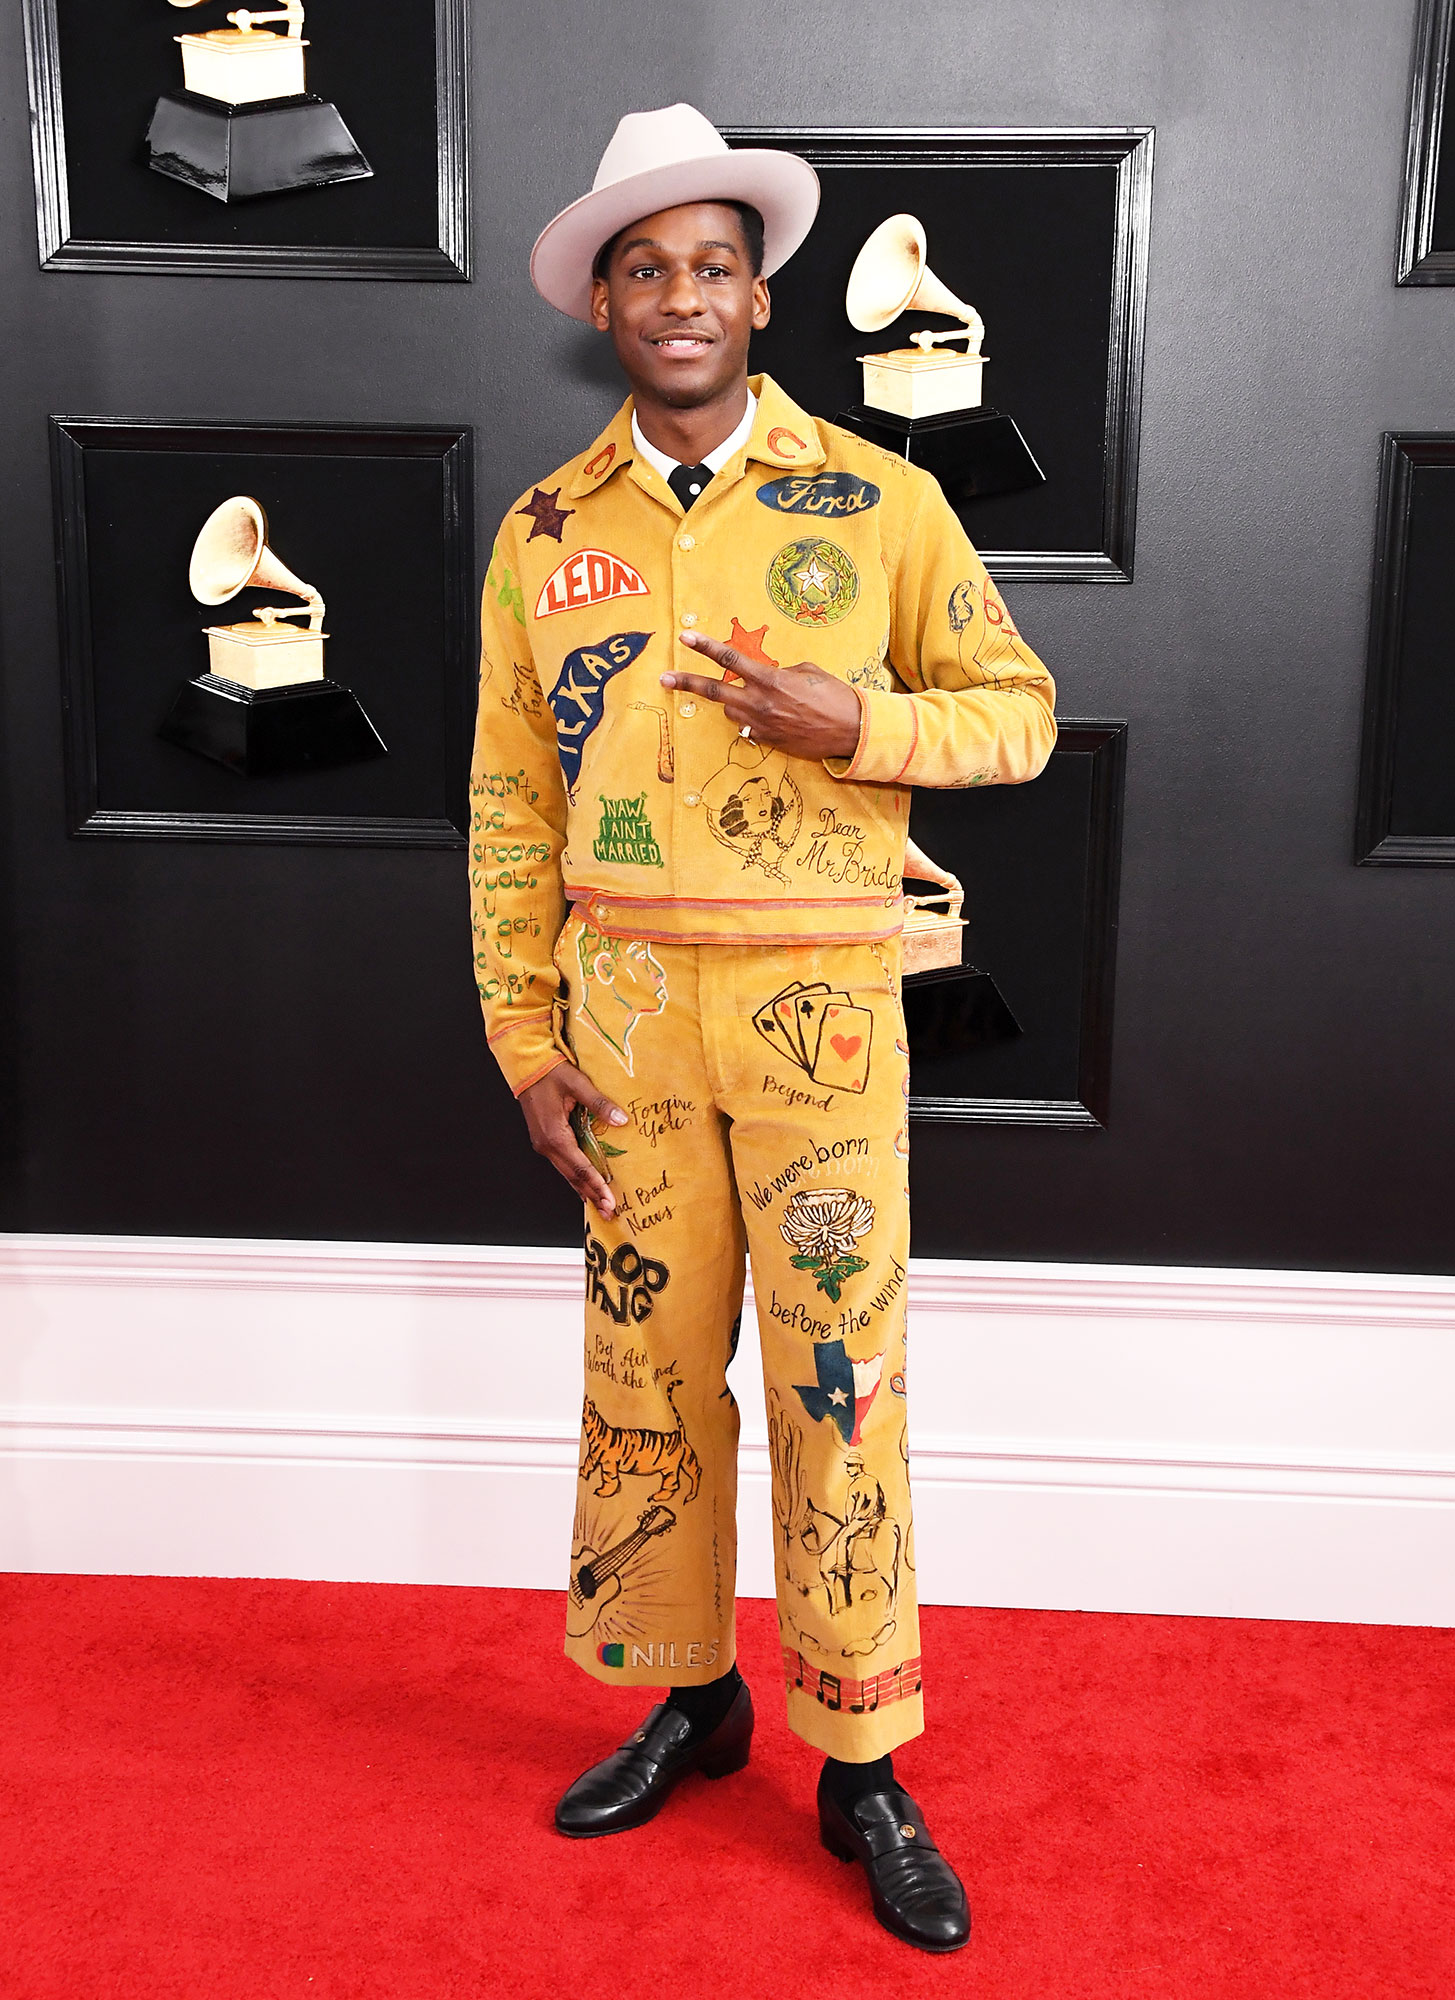 Grammys 2019 Red Carpet Fashion Hot Men in Suits, Tuxes